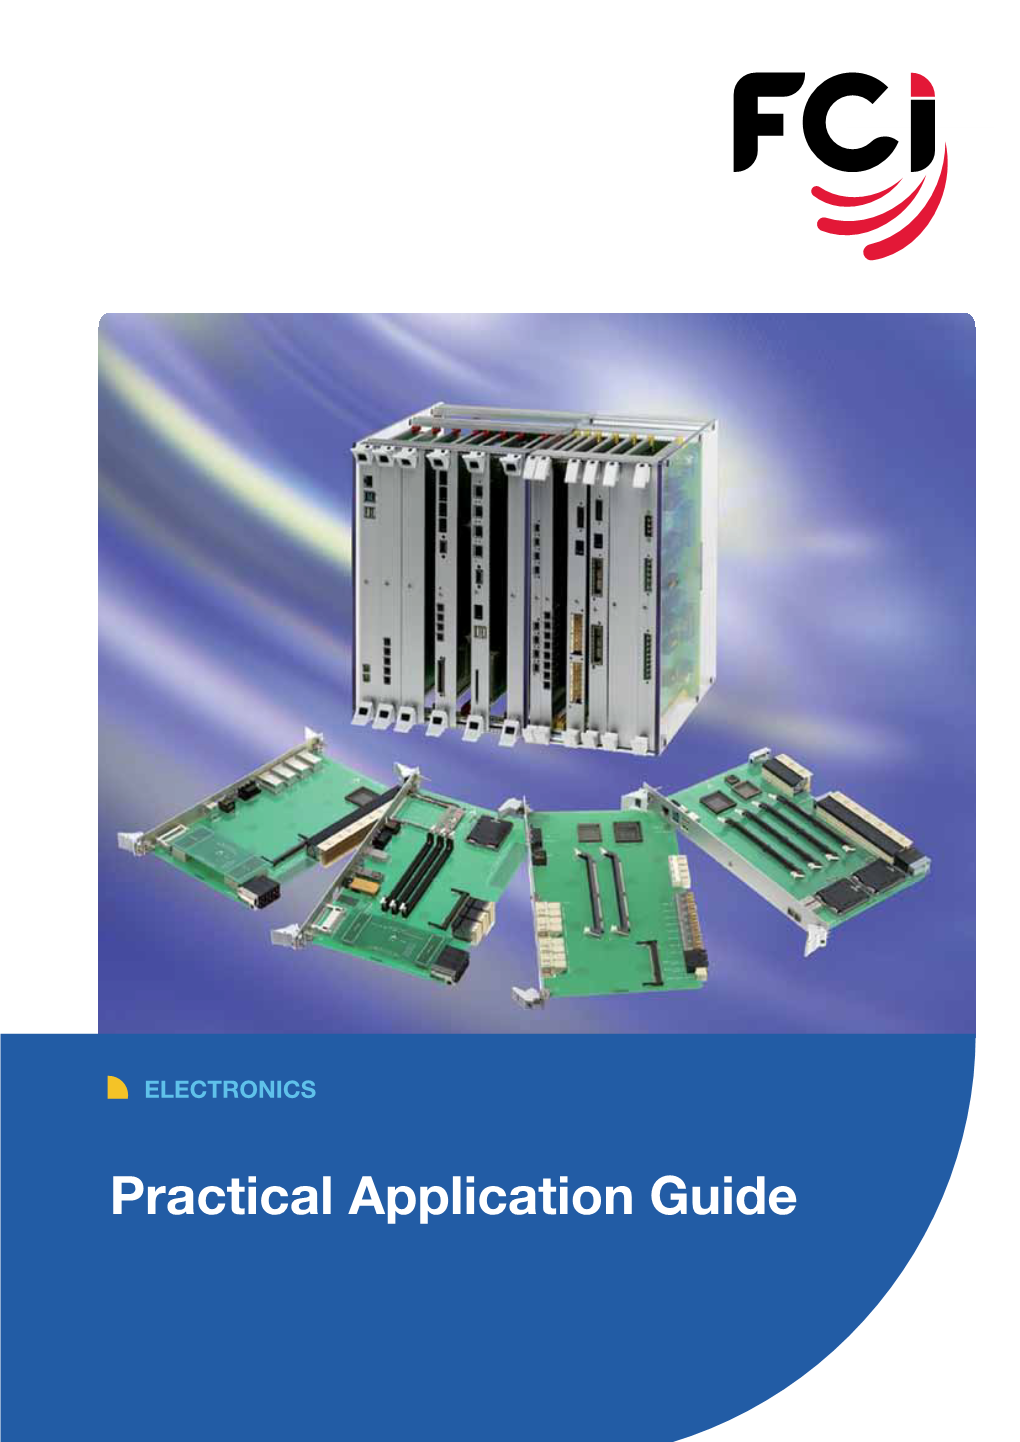 Practical Application Guide FCI: SETTING the STANDARD for CONNECTORS